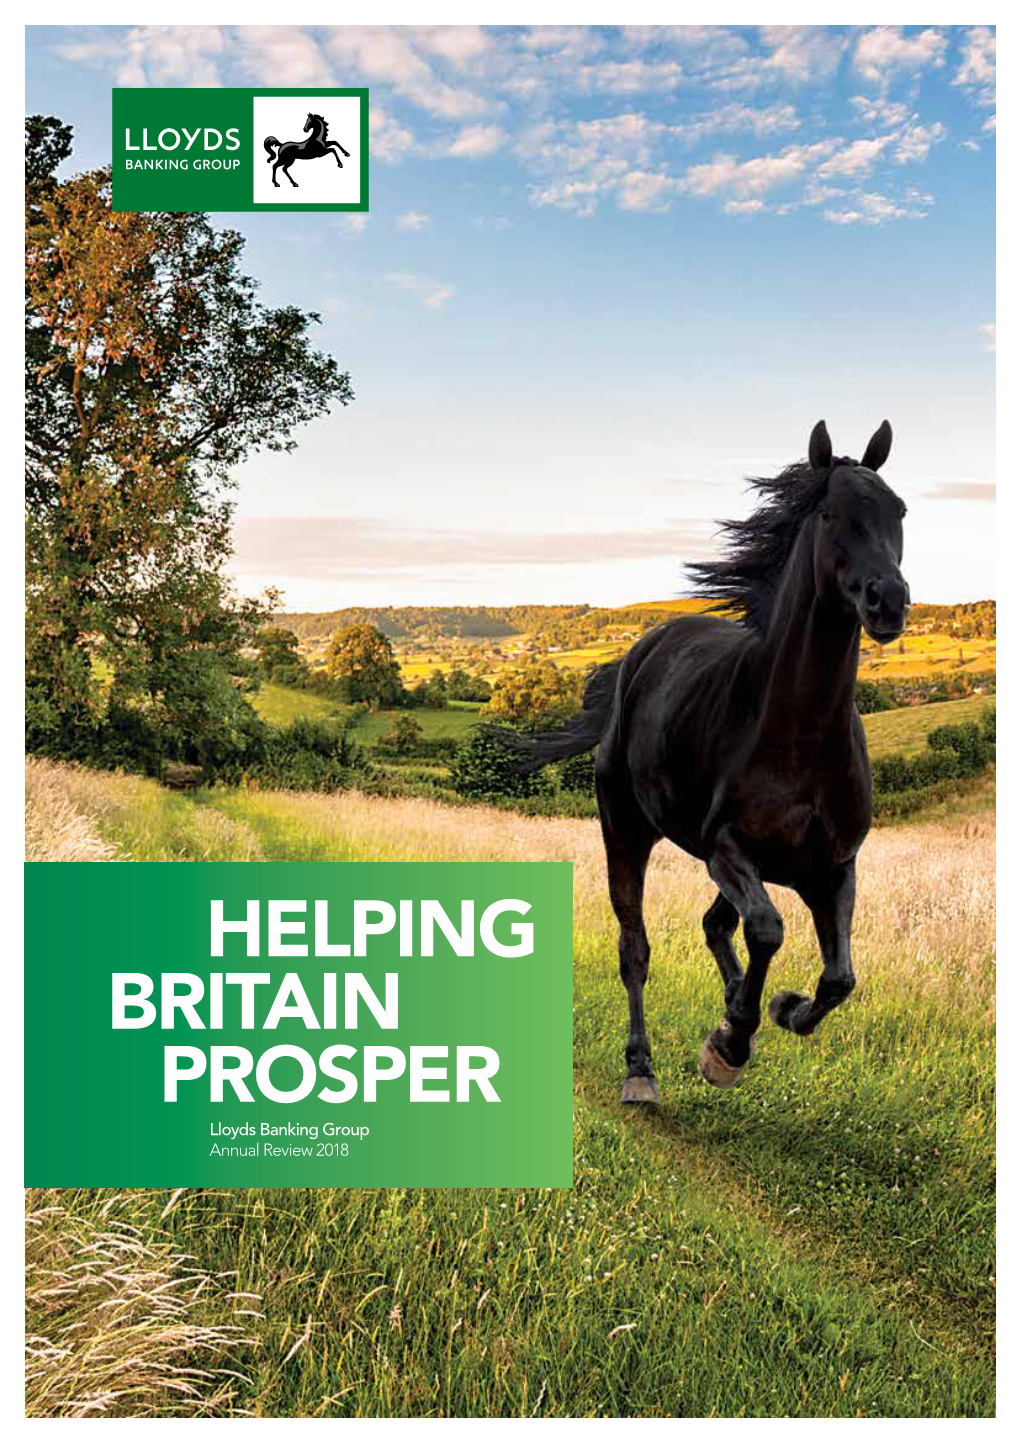 Annual Review 2018 About Us Our Purpose Is to Help Britain Prosper